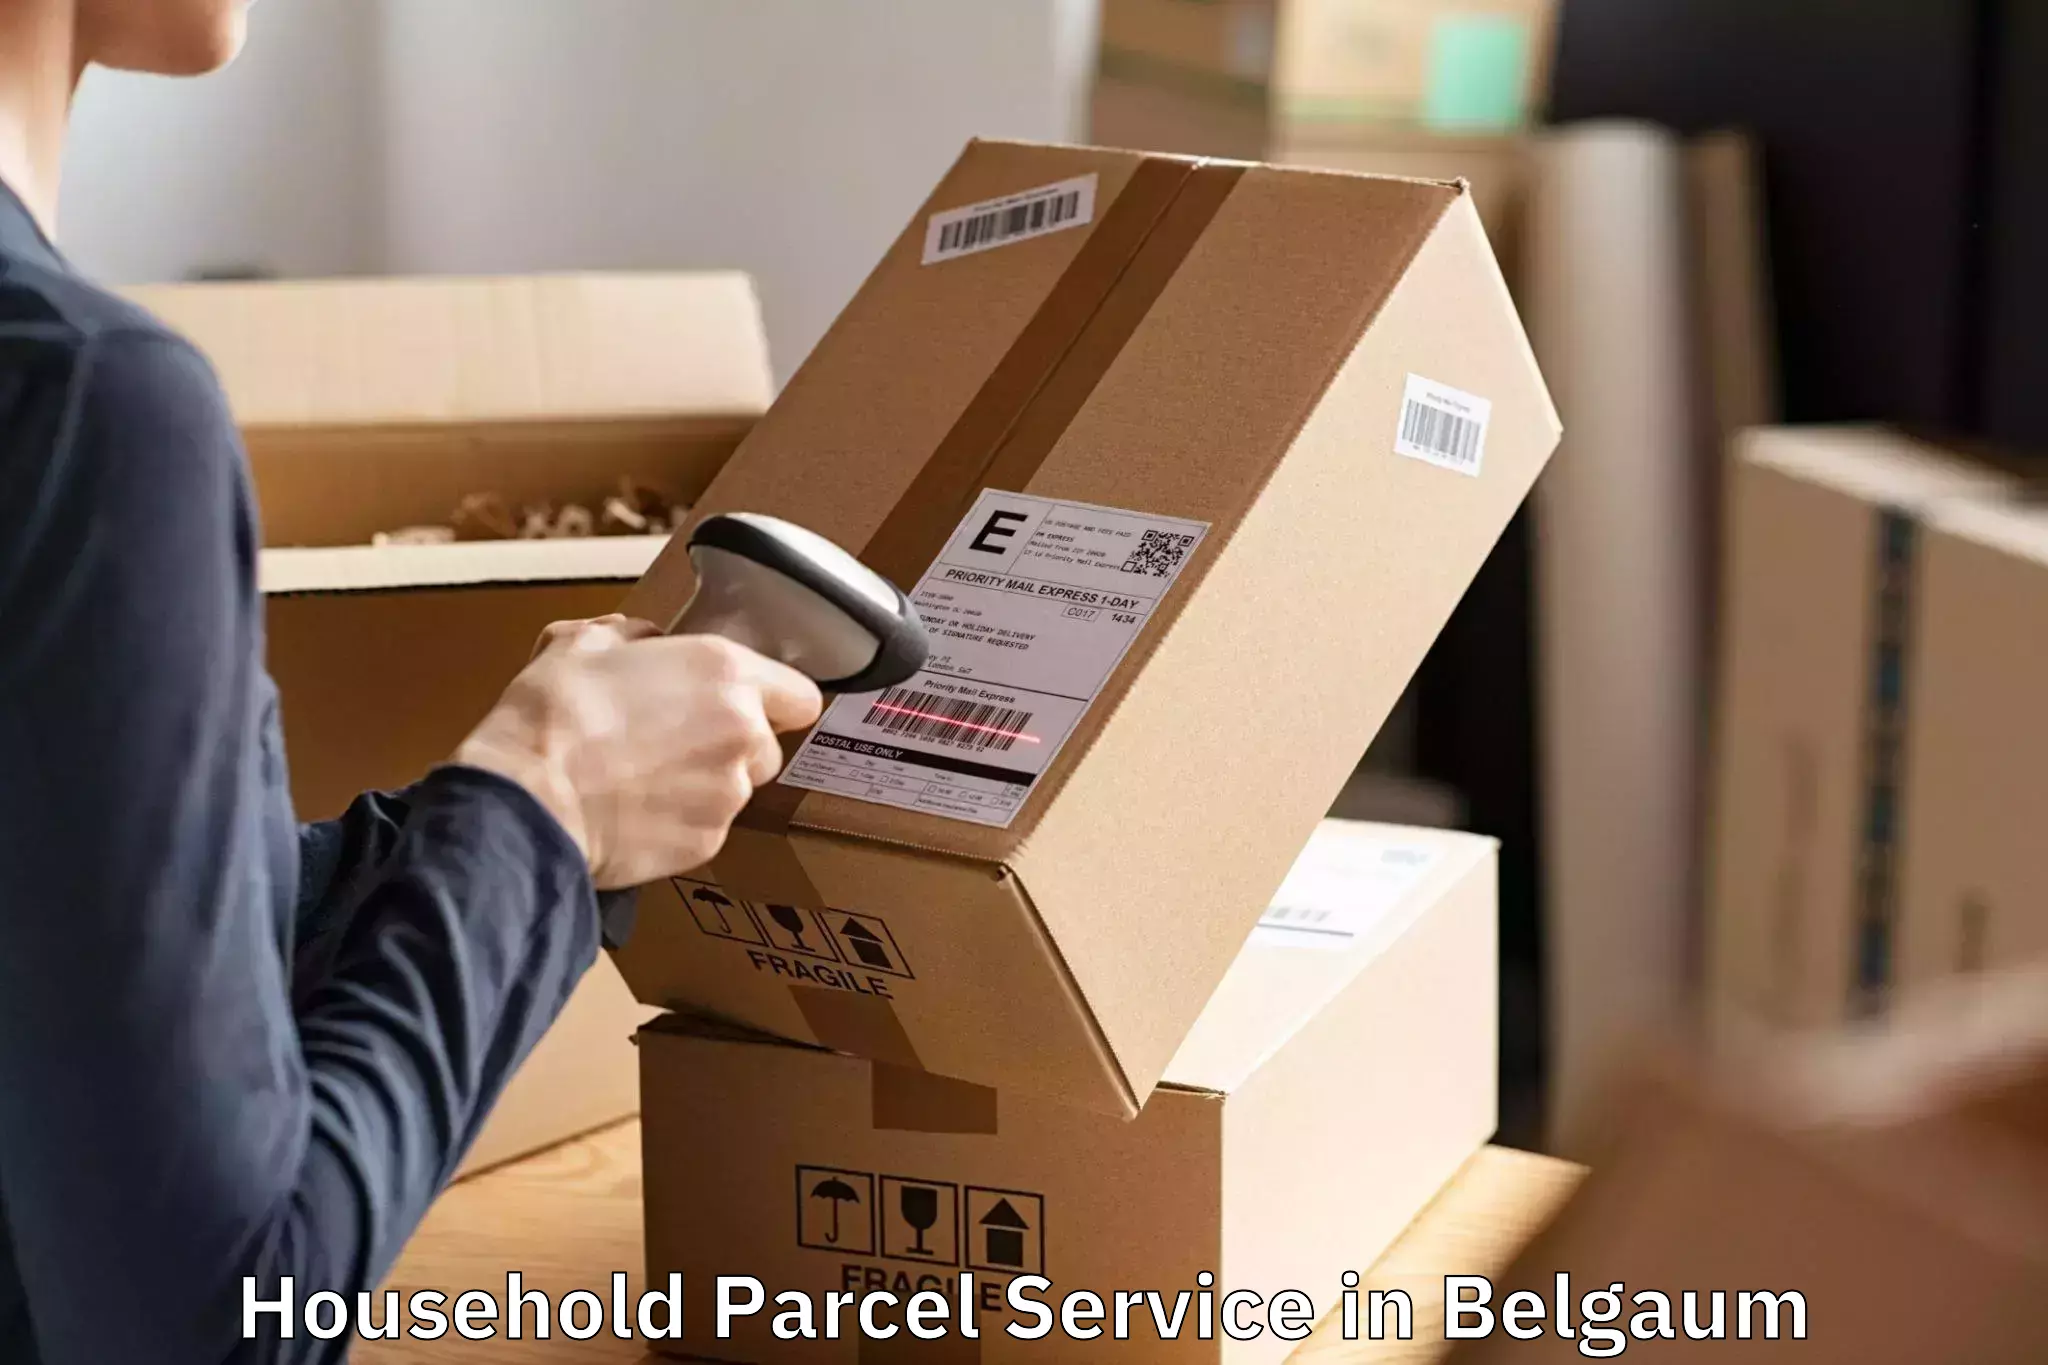 Expert Household Parcel Service Throughout India